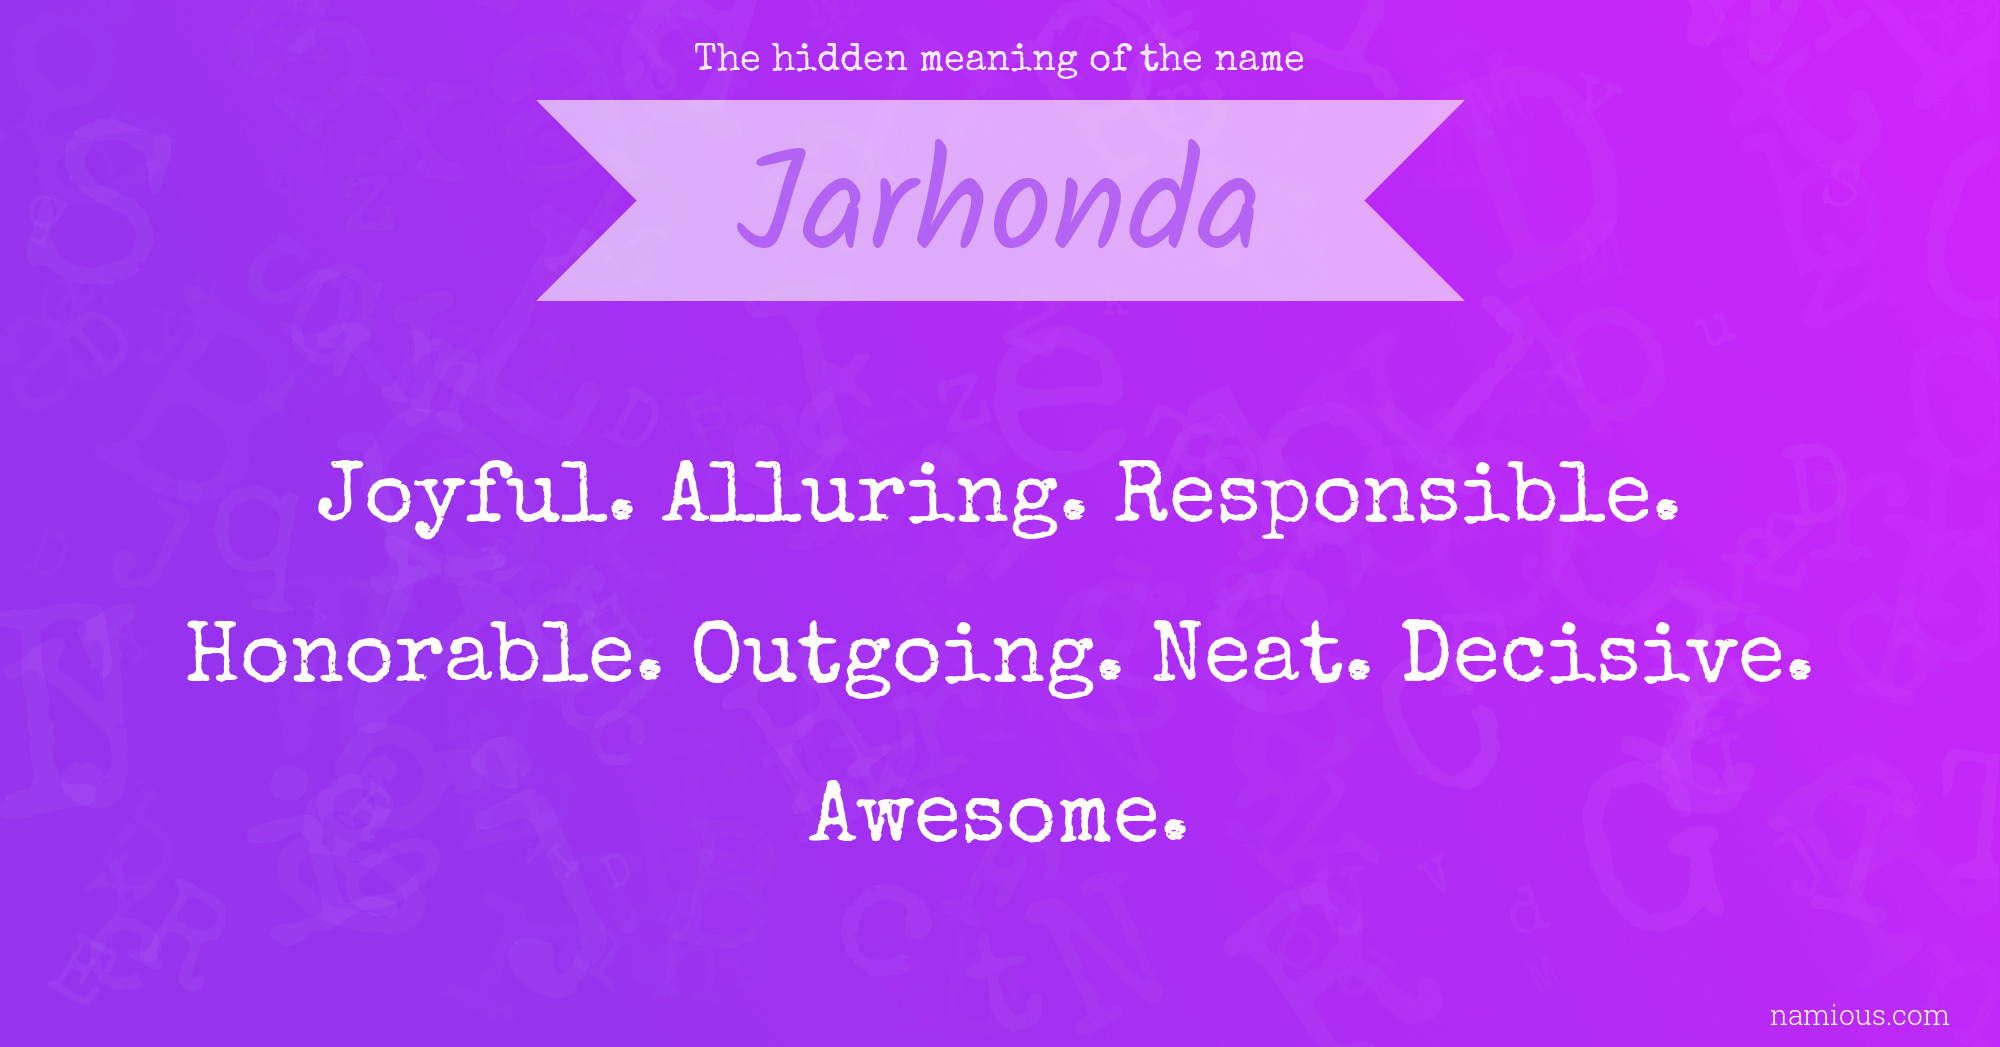 The hidden meaning of the name Jarhonda